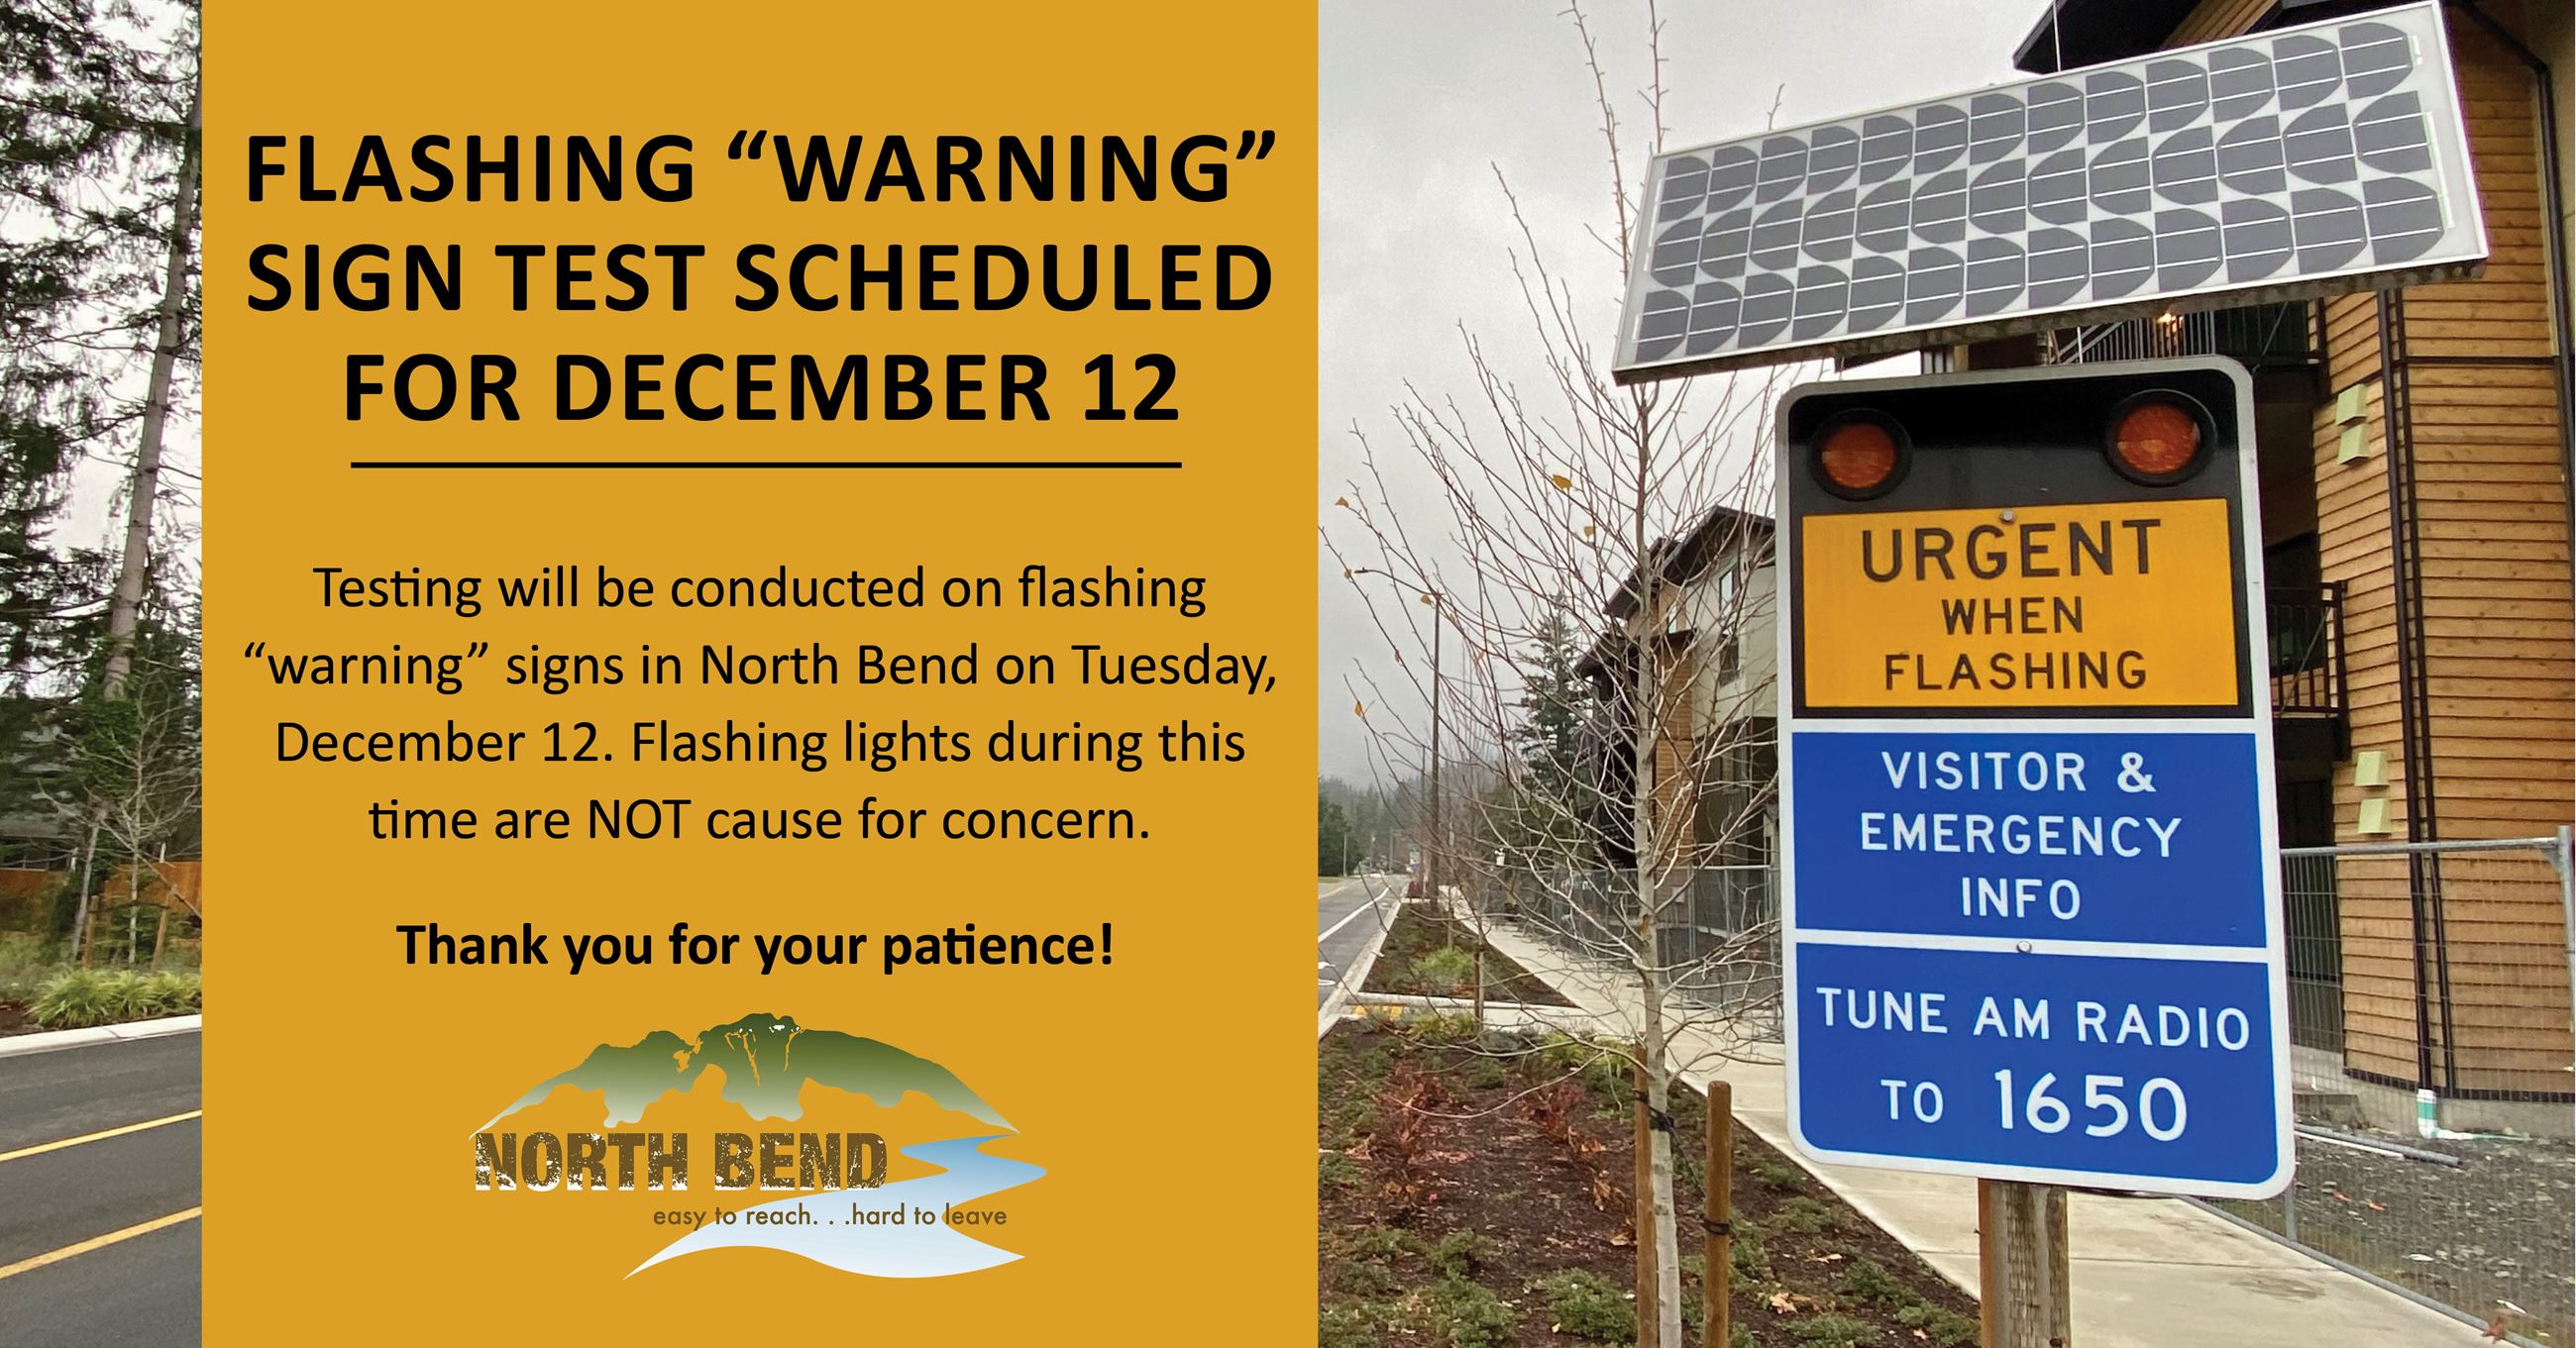  Flashing “warning” sign test scheduled for Tuesday, December 12 